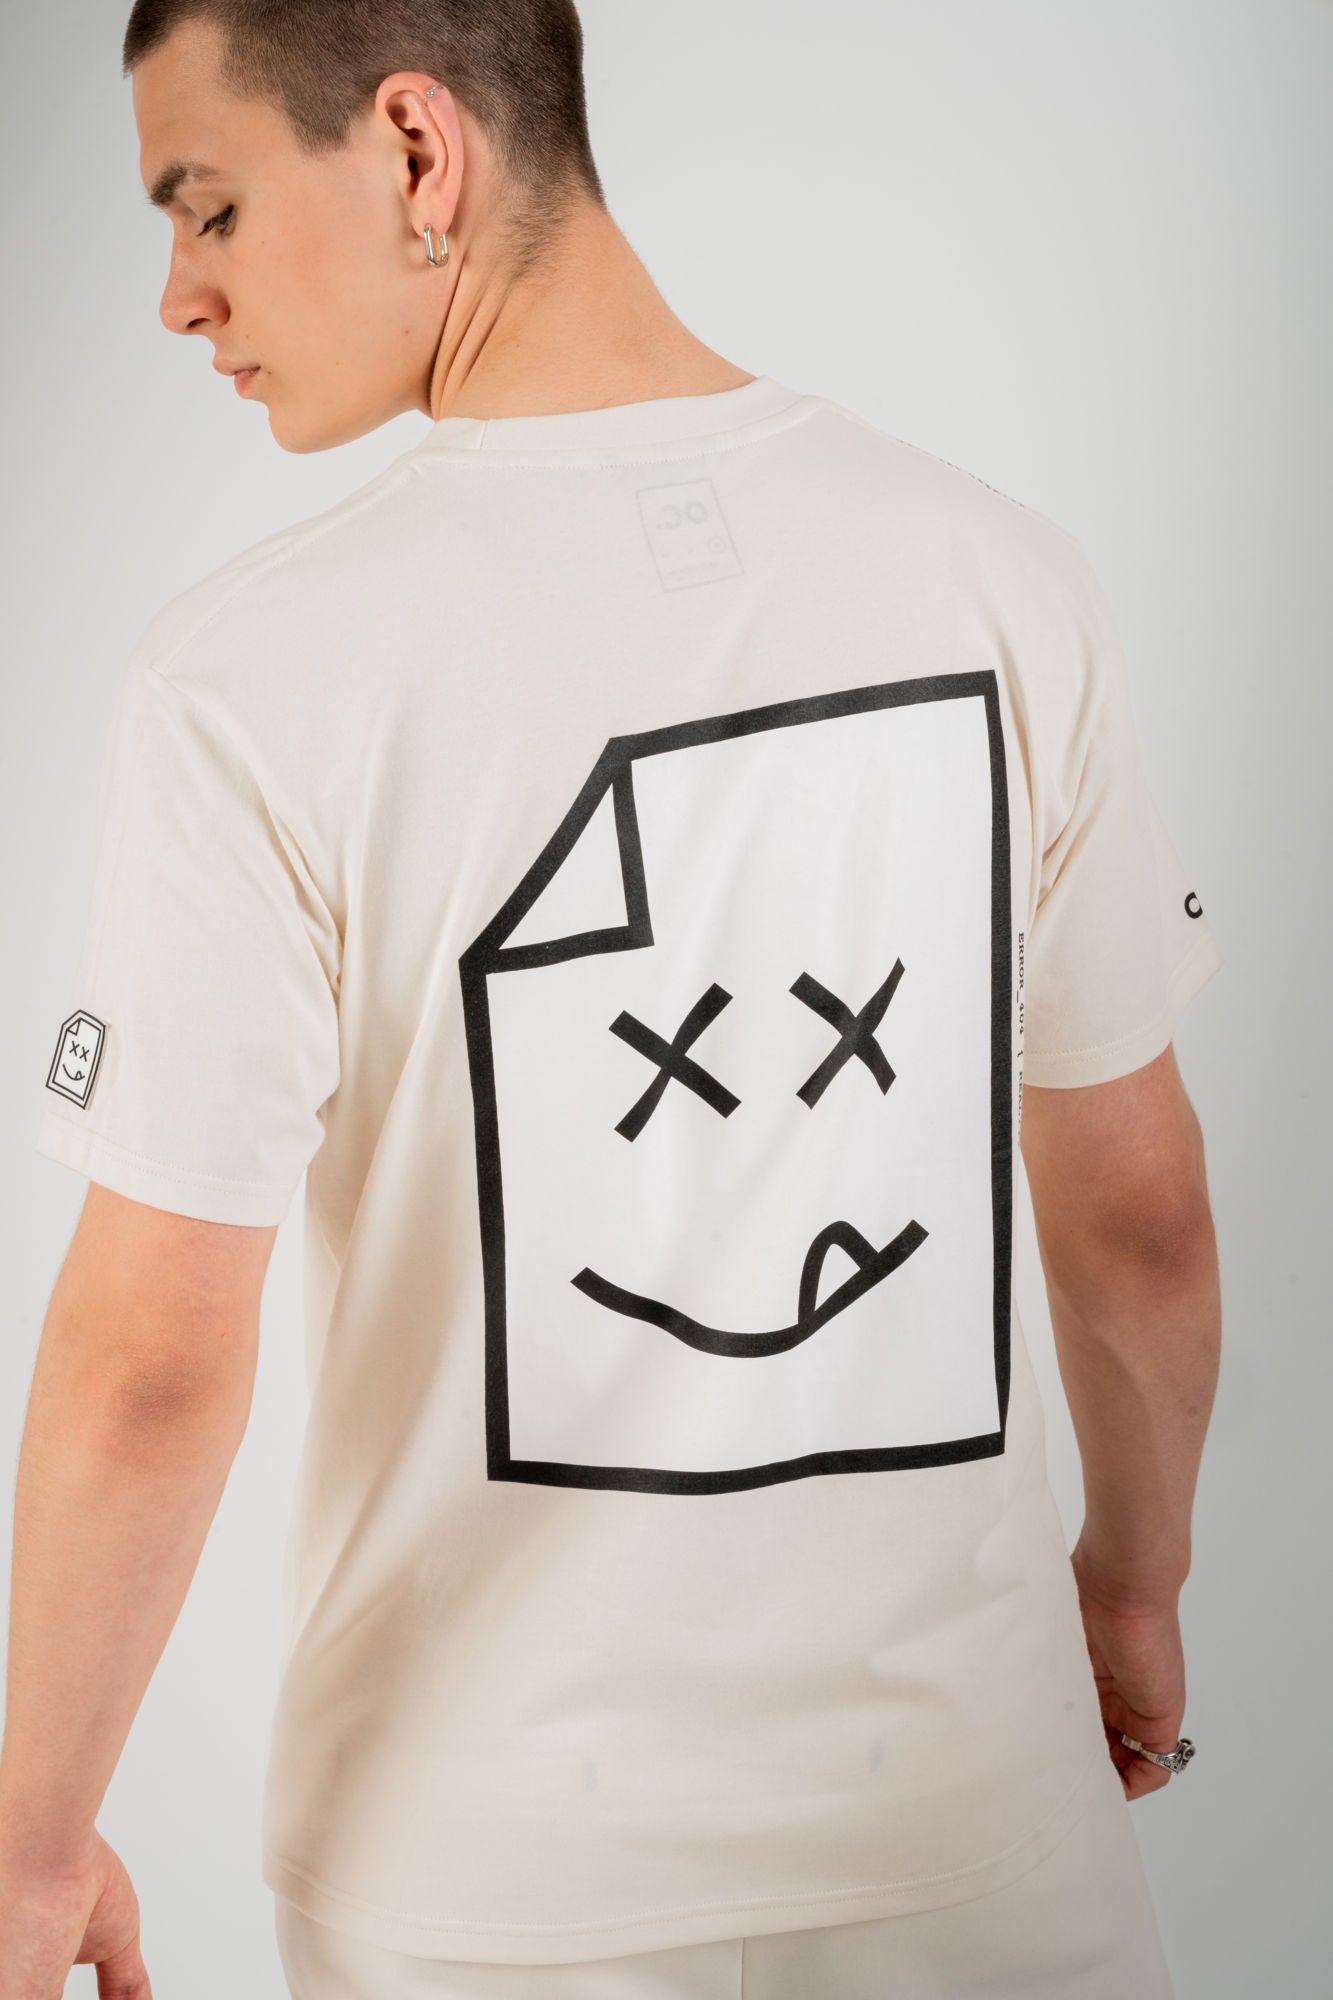 Smiley_404 T-Shirt - Off White